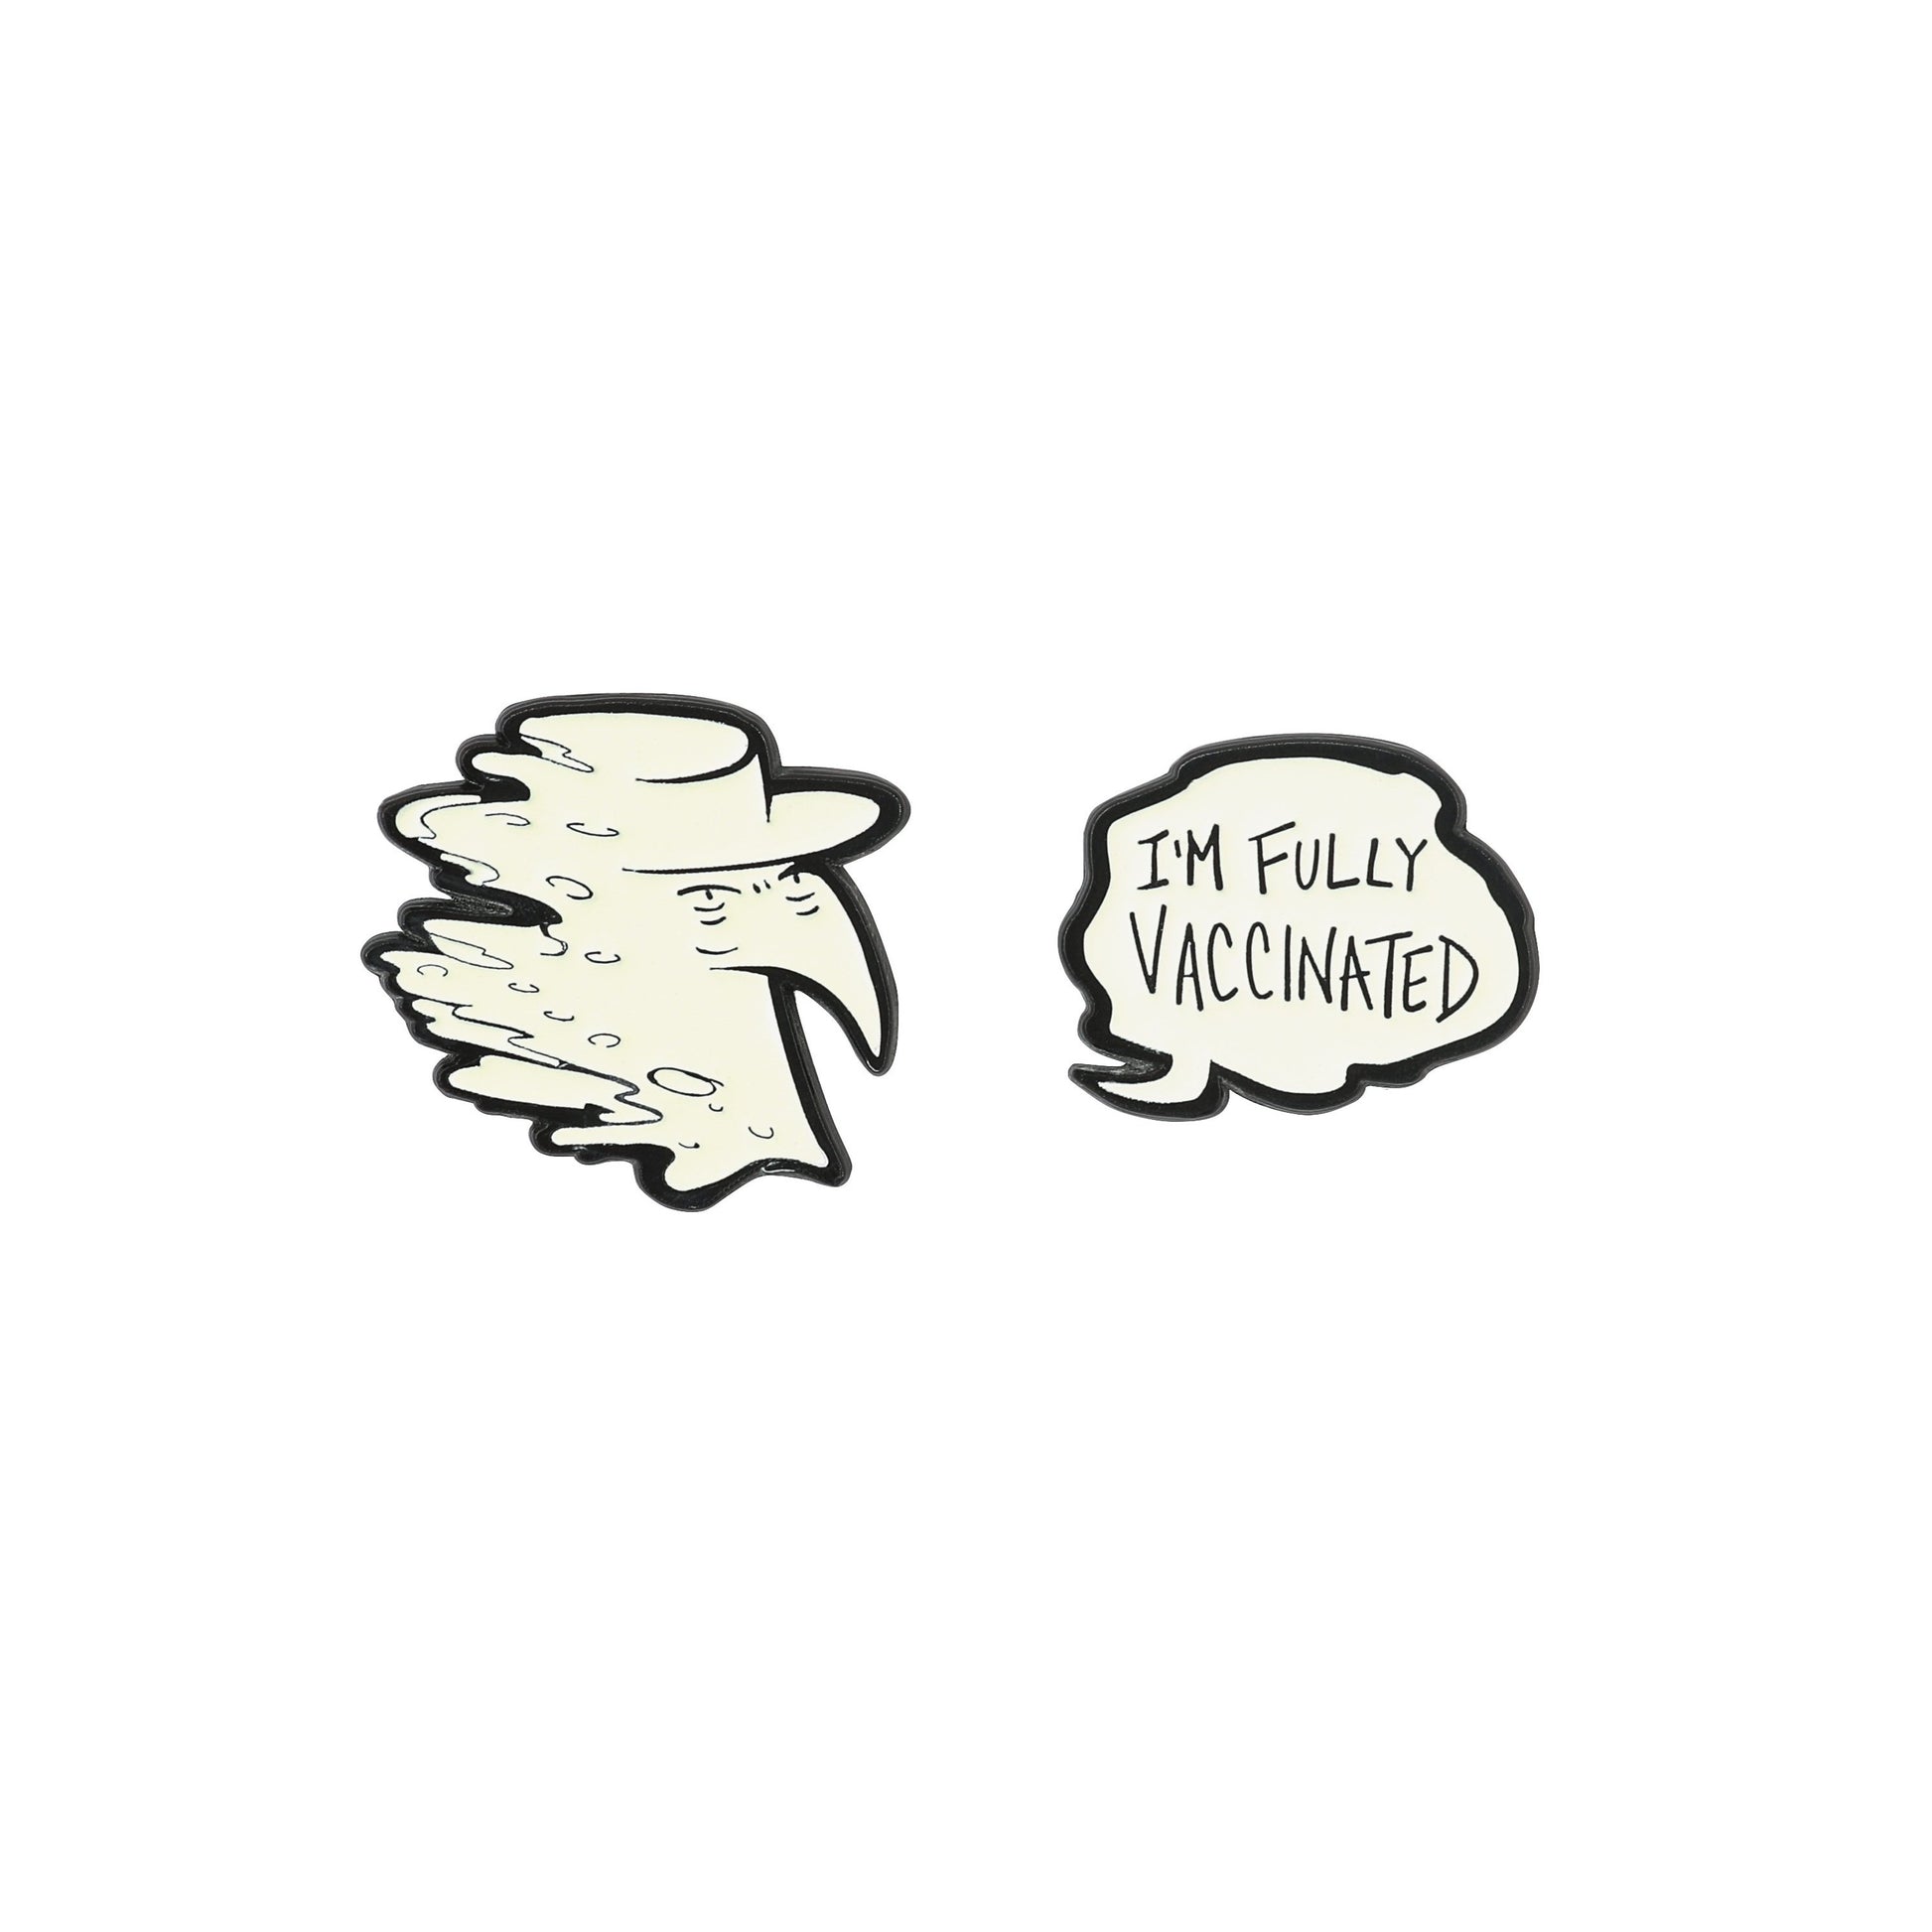 Both Spooky Peter pins on white background.